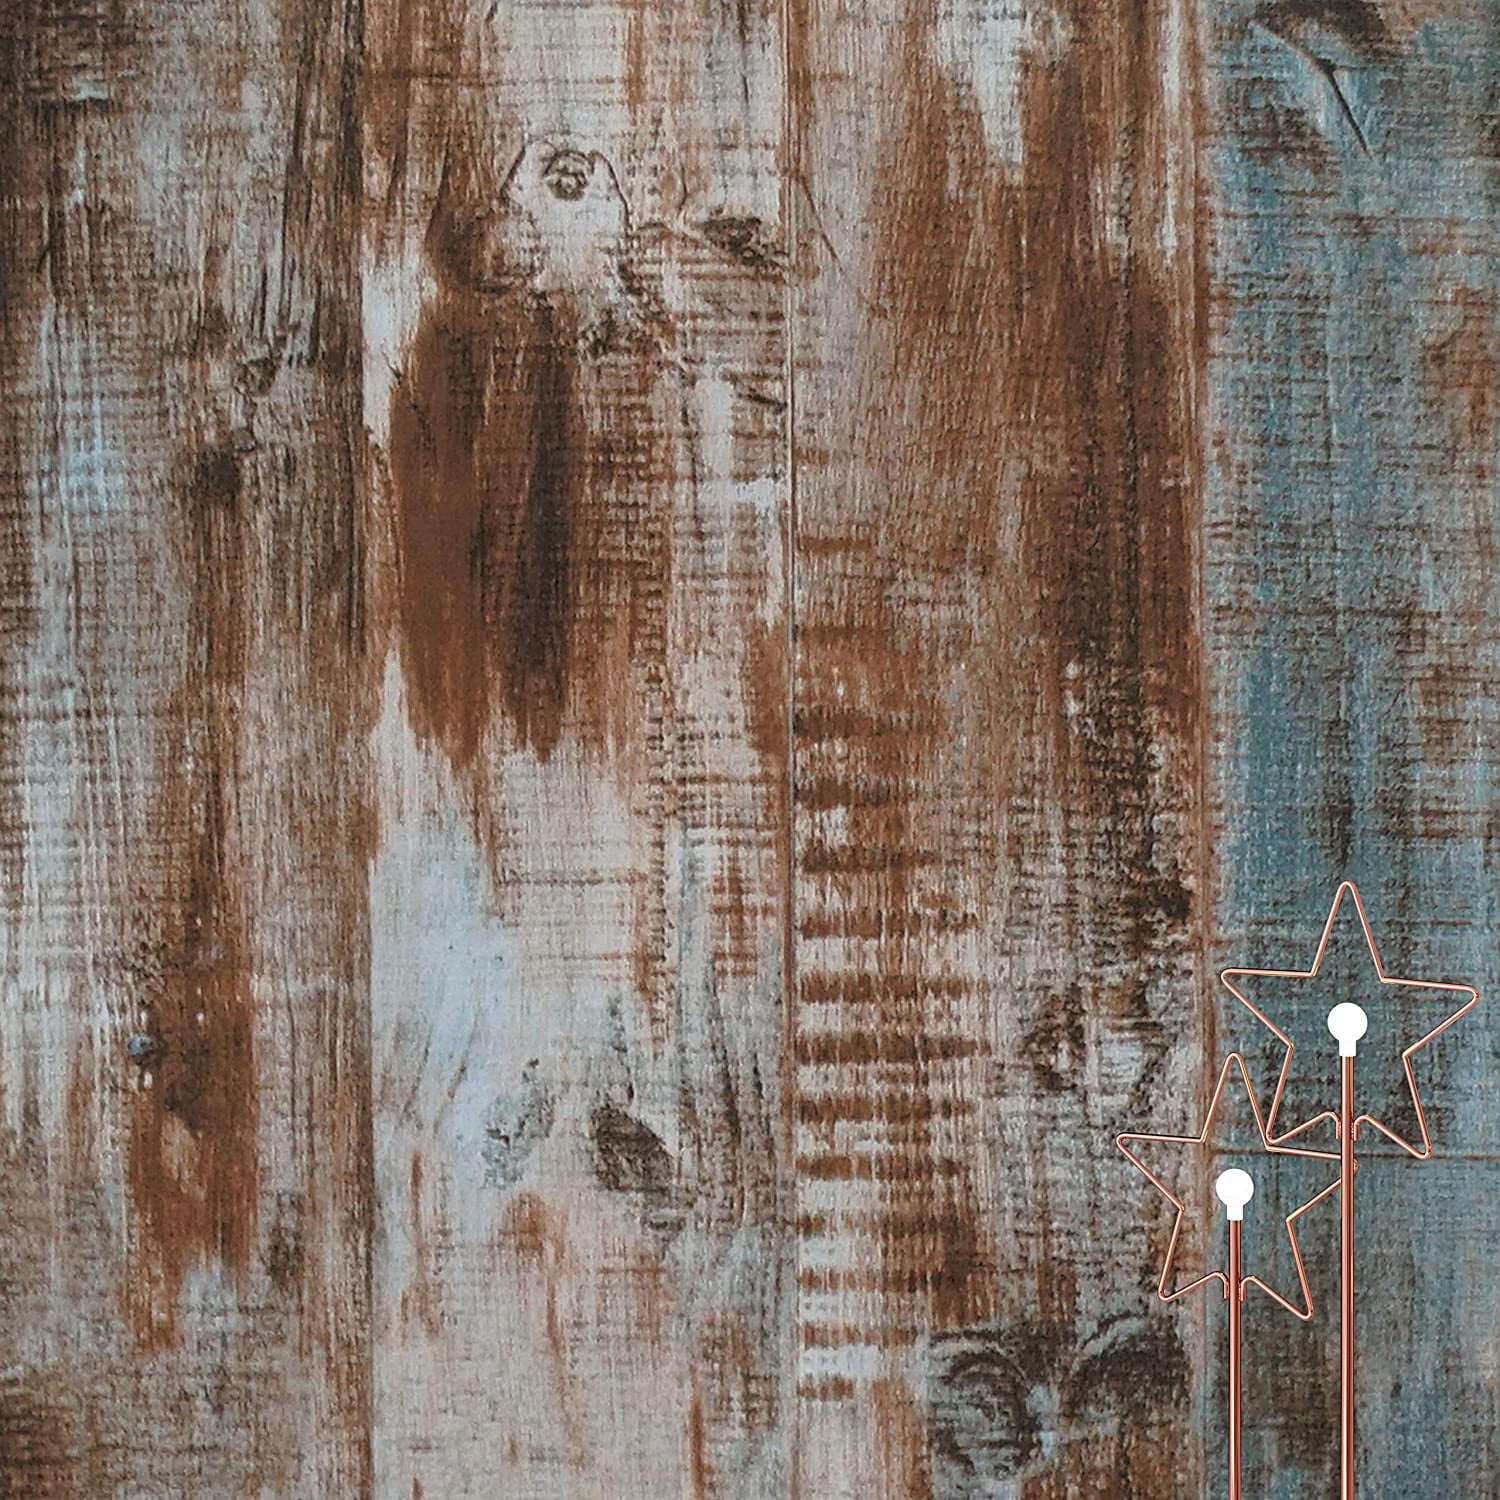 Caltero Wood Plank Wallpaper 17.7 × 197 Blue Distressed Wood Wallpaper Peel and Stick Wood Grain Contact Paper Vintage for Furniture Bedroom Countertop Cabinet